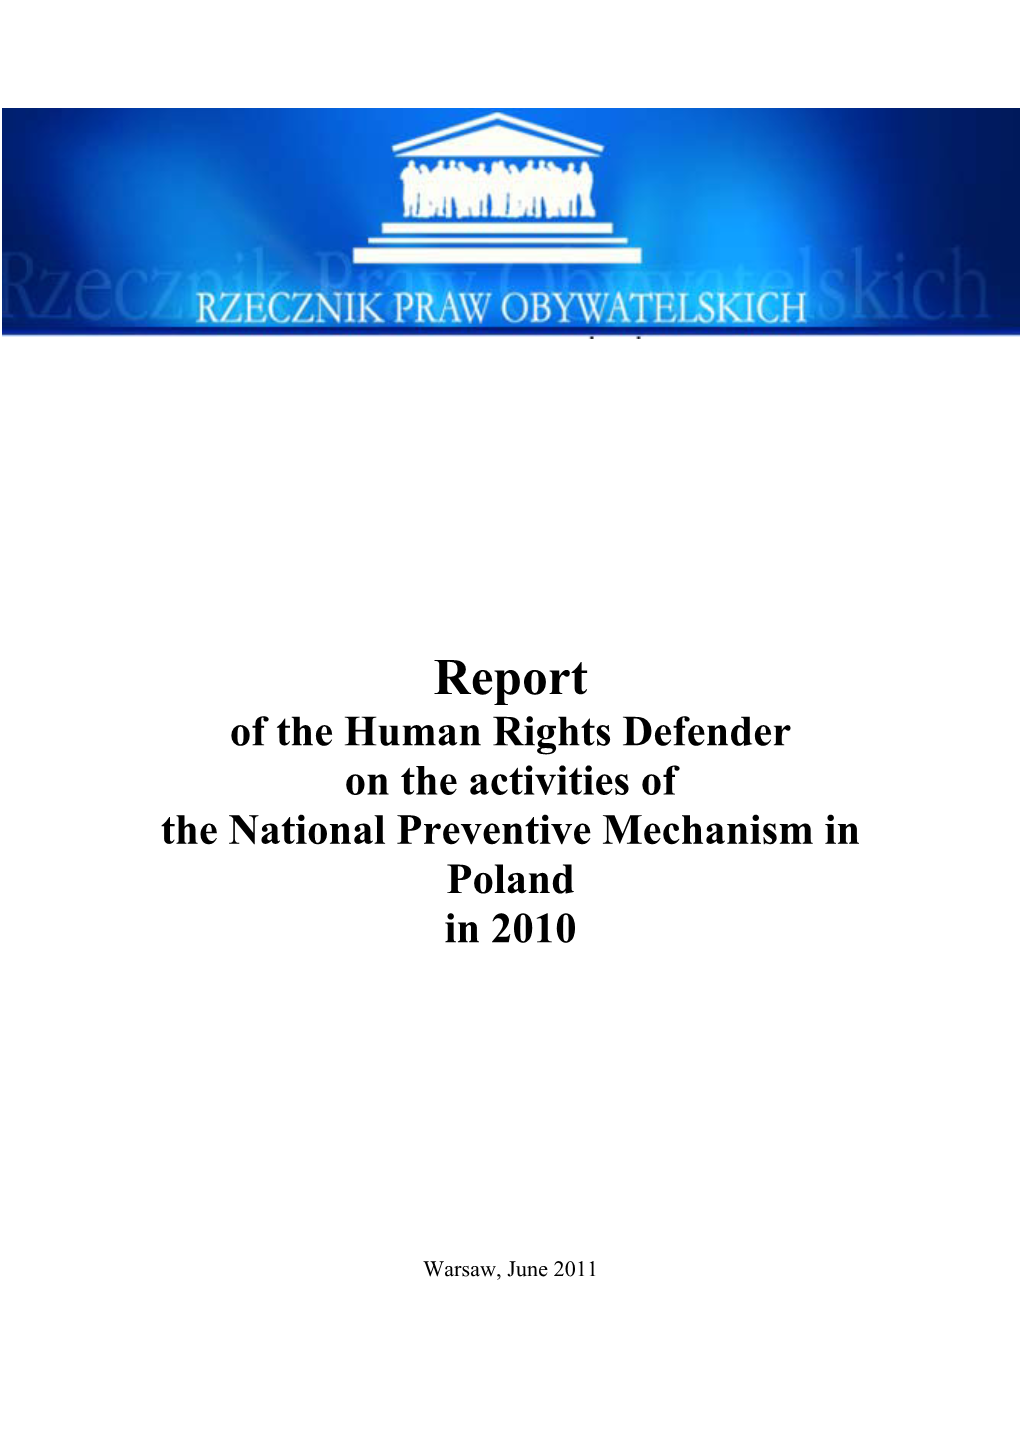 Report of the Human Rights Defender on the Activities of the National Preventive Mechanism in Poland in 2010